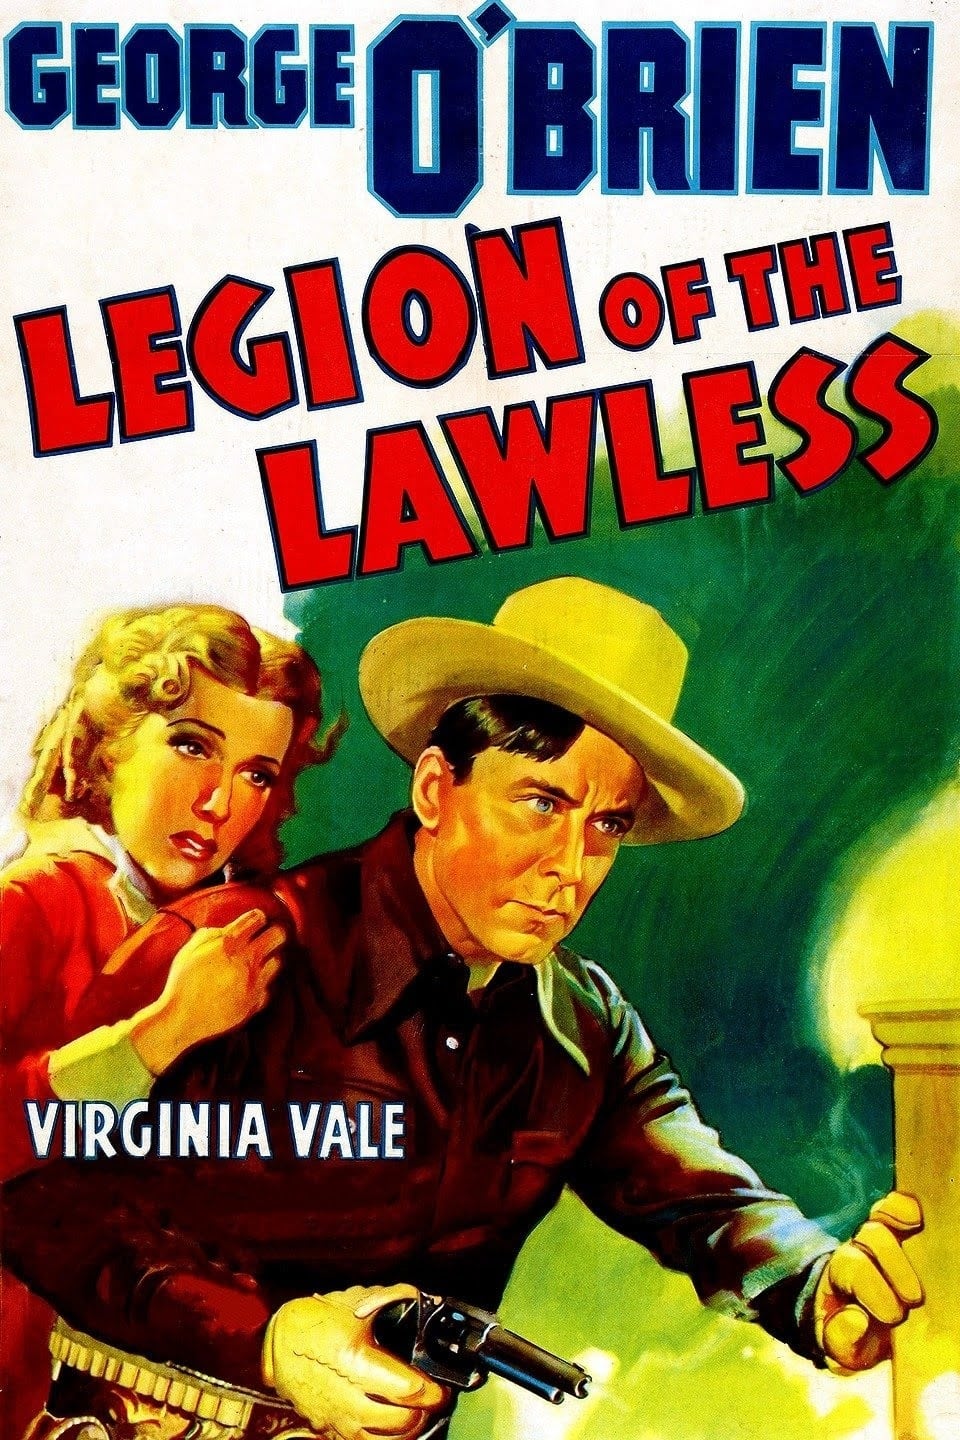 Legion of the Lawless (1940)